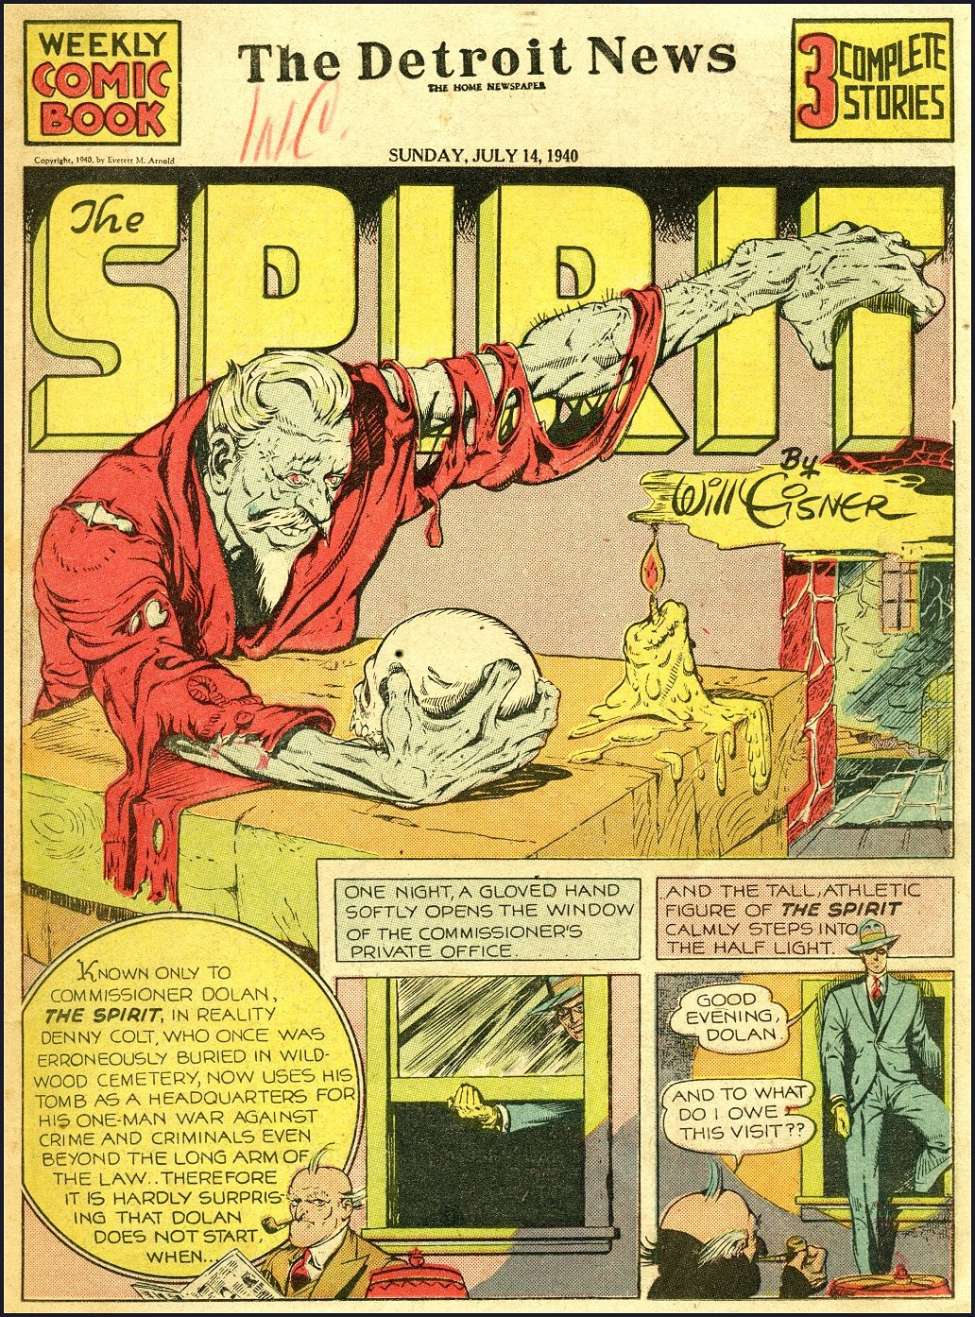 Comic Book Cover For The Spirit (1940-07-14) - Detroit News